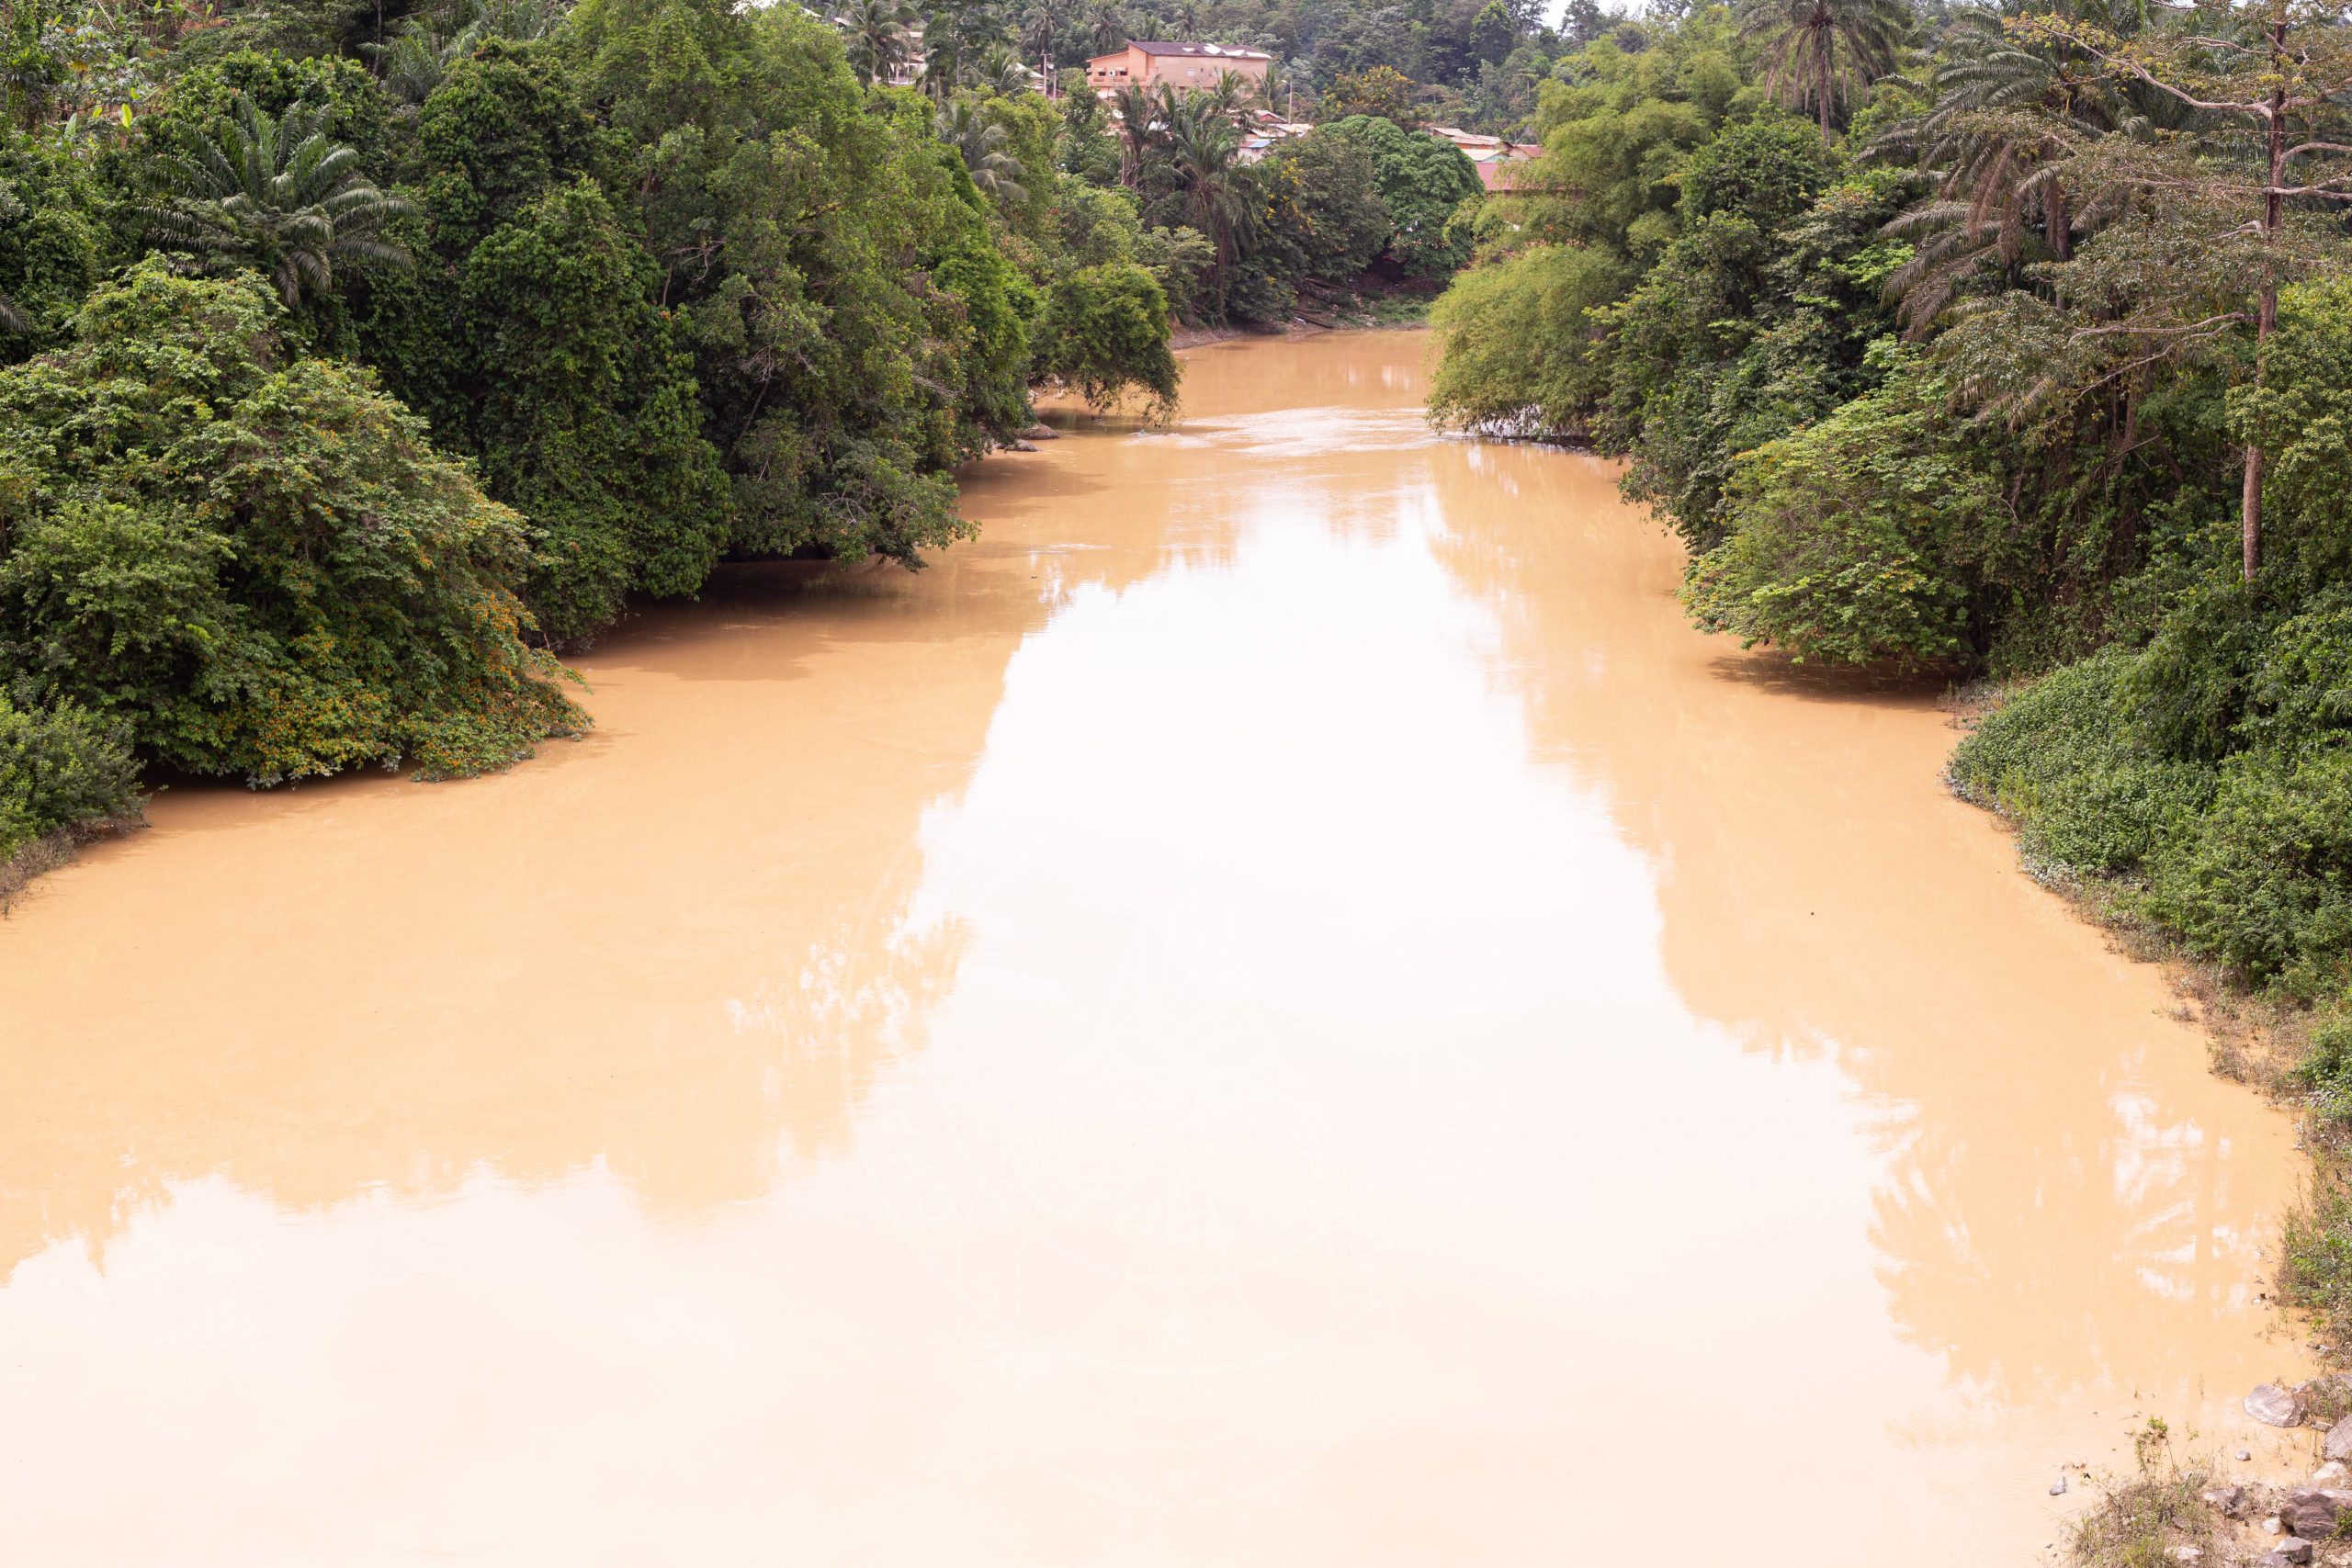 River Tano still in “pain” due to Galamsey activities